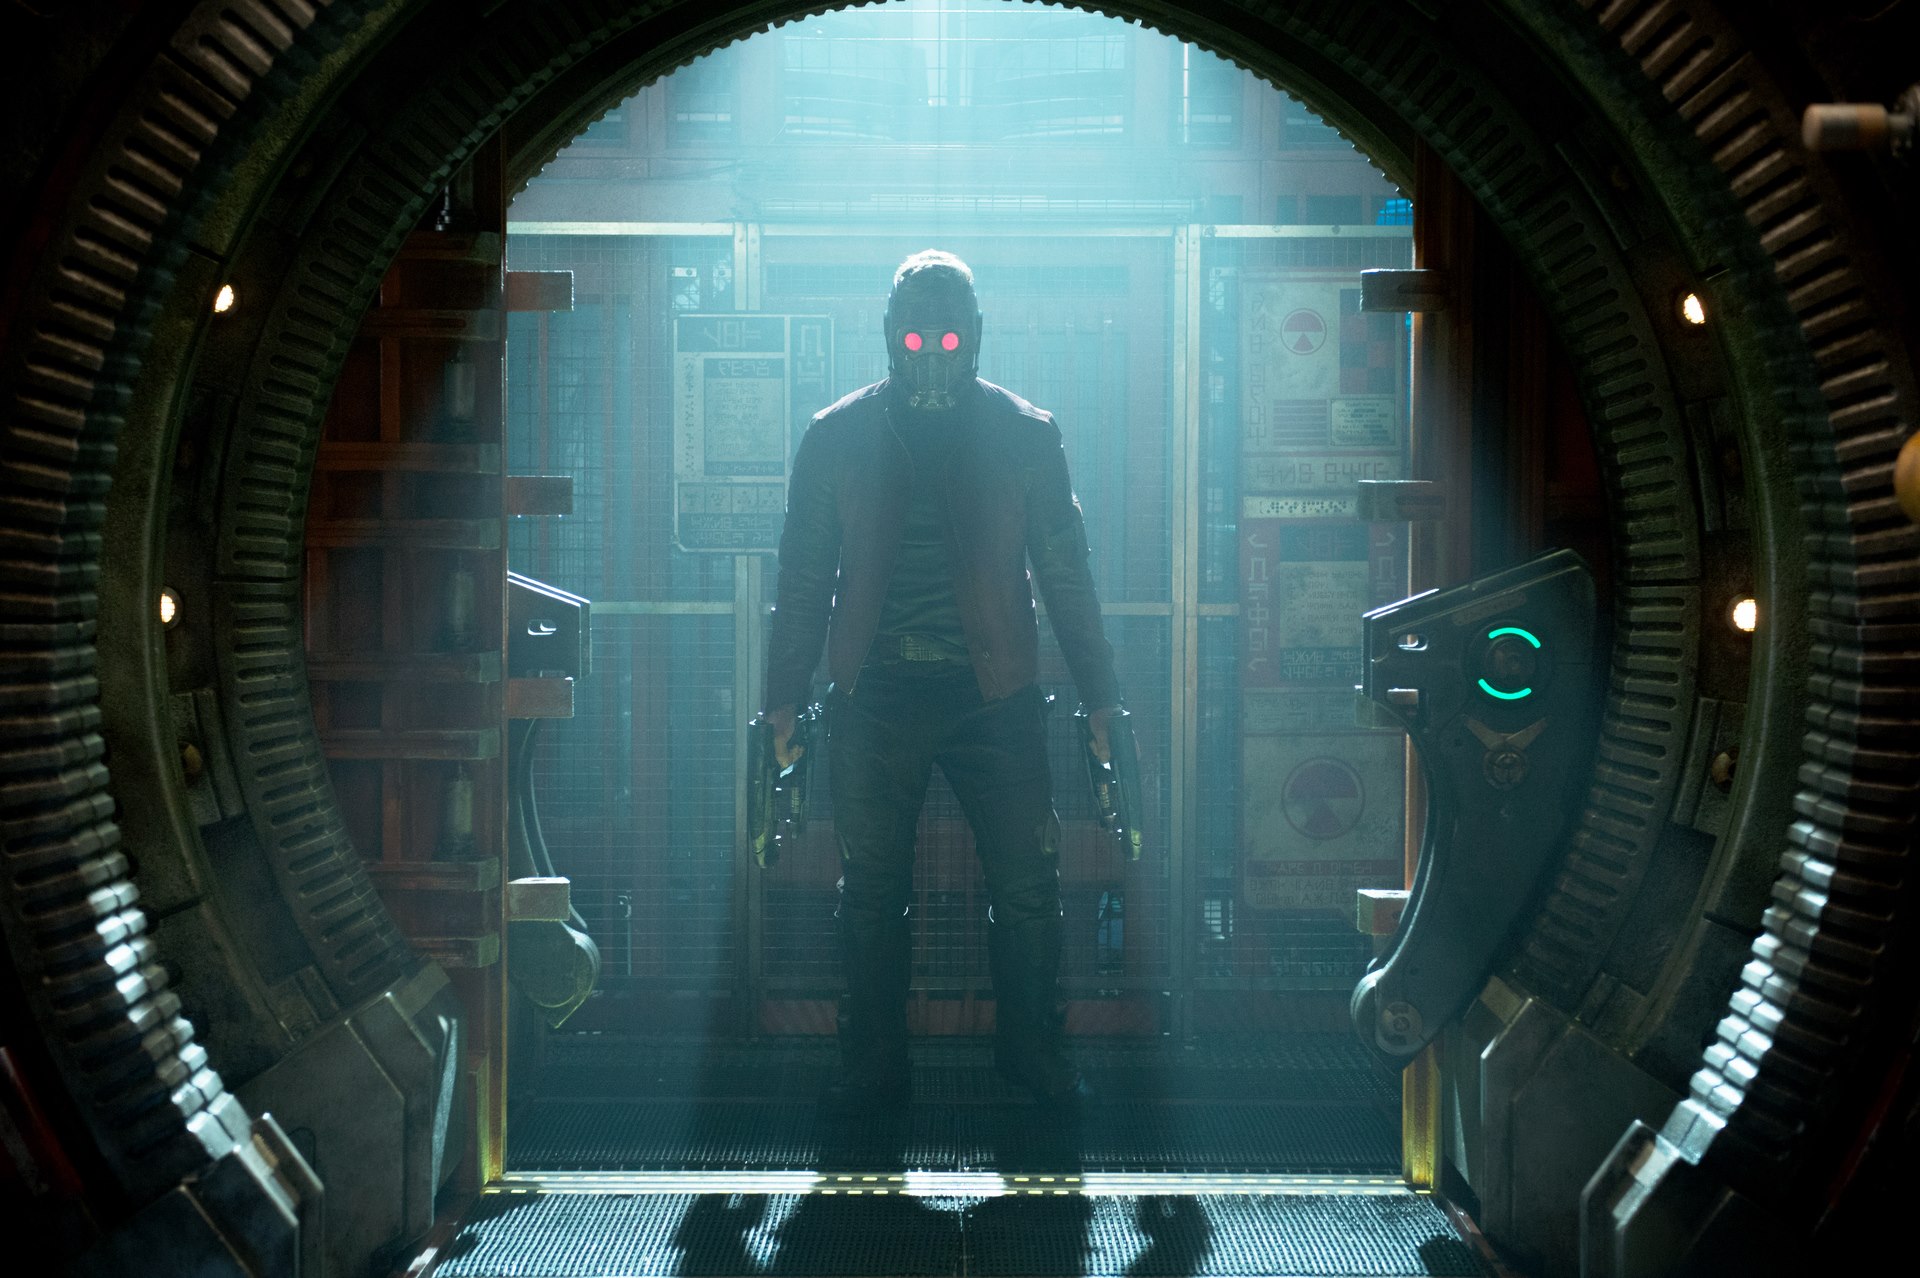 Guardians of the Galaxy Star Lord costume 1